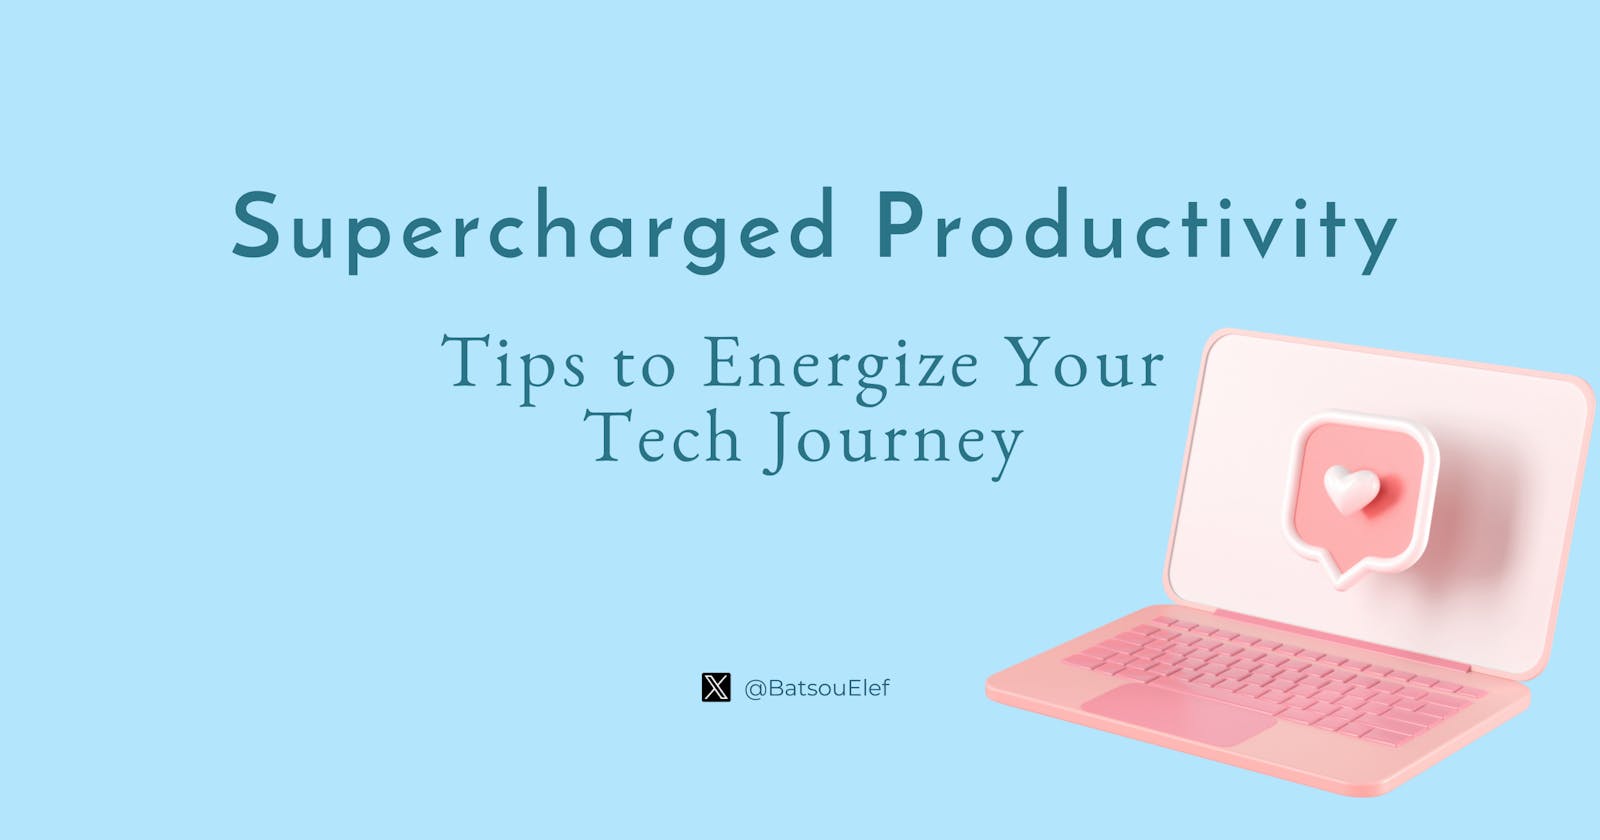 Supercharged Productivity: Tips to Energize Your Tech Journey